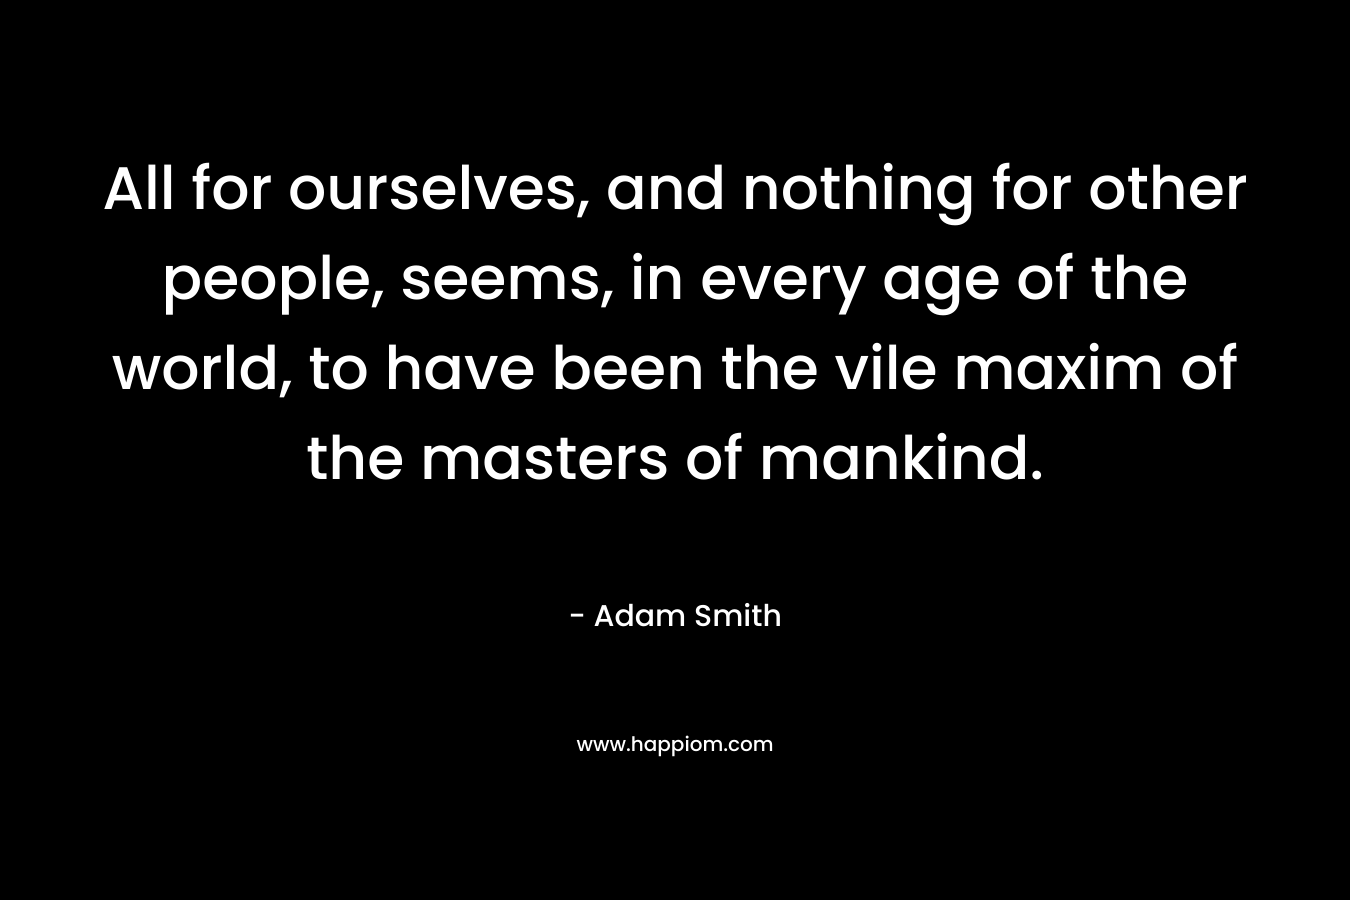 All for ourselves, and nothing for other people, seems, in every age of the world, to have been the vile maxim of the masters of mankind. – Adam Smith